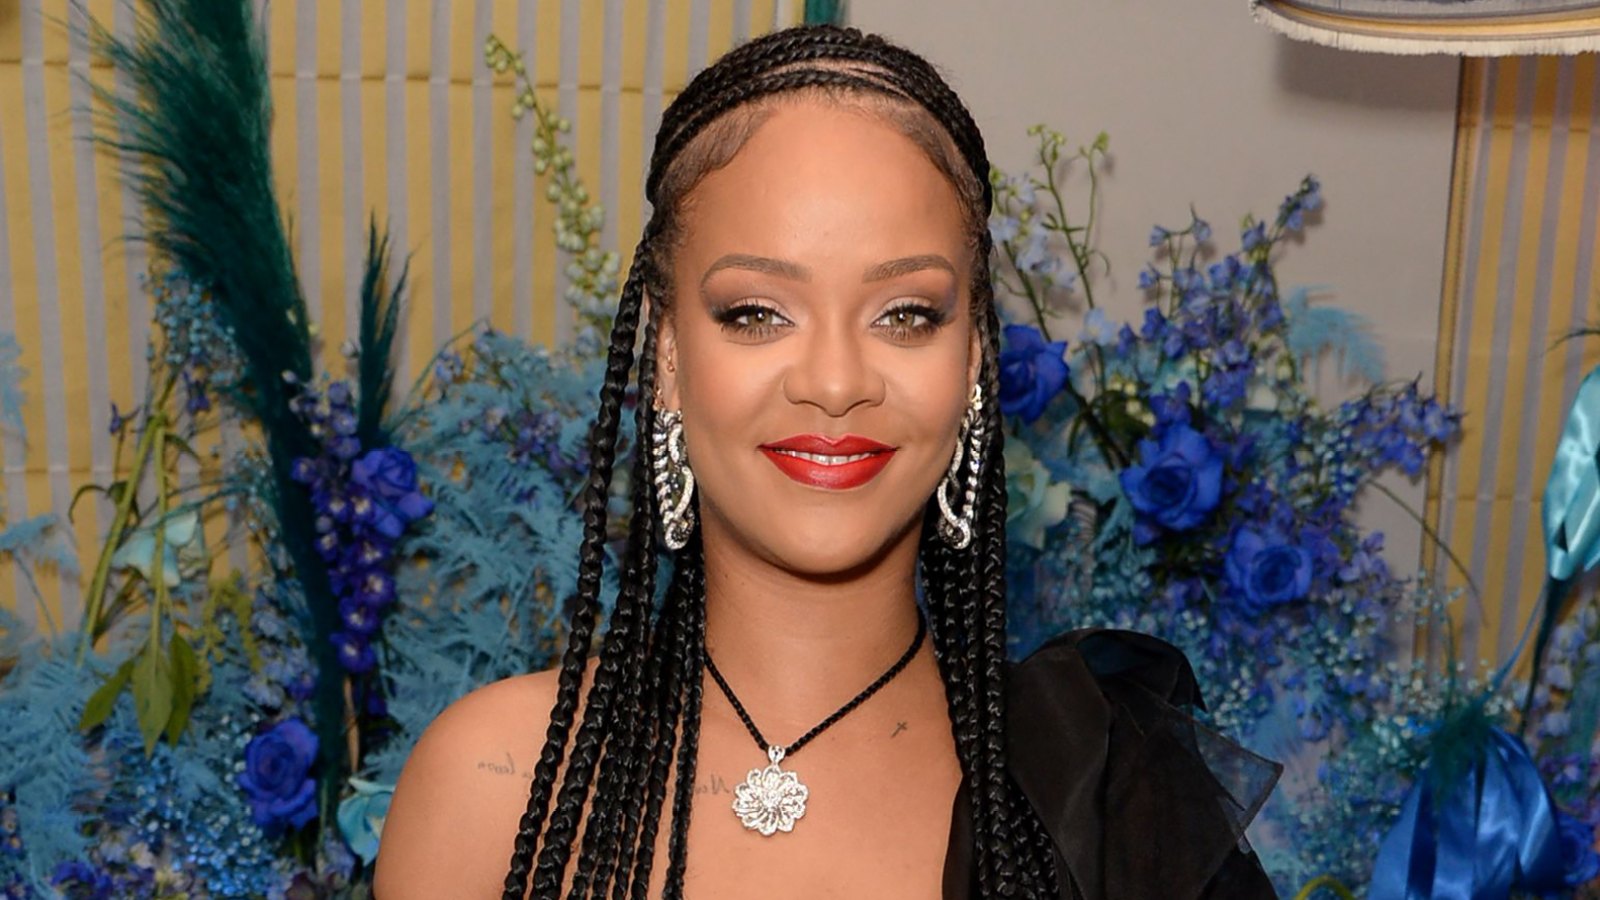 Rihanna Hopes She'll Have '3 or 4' Kids in the Next 10 Years